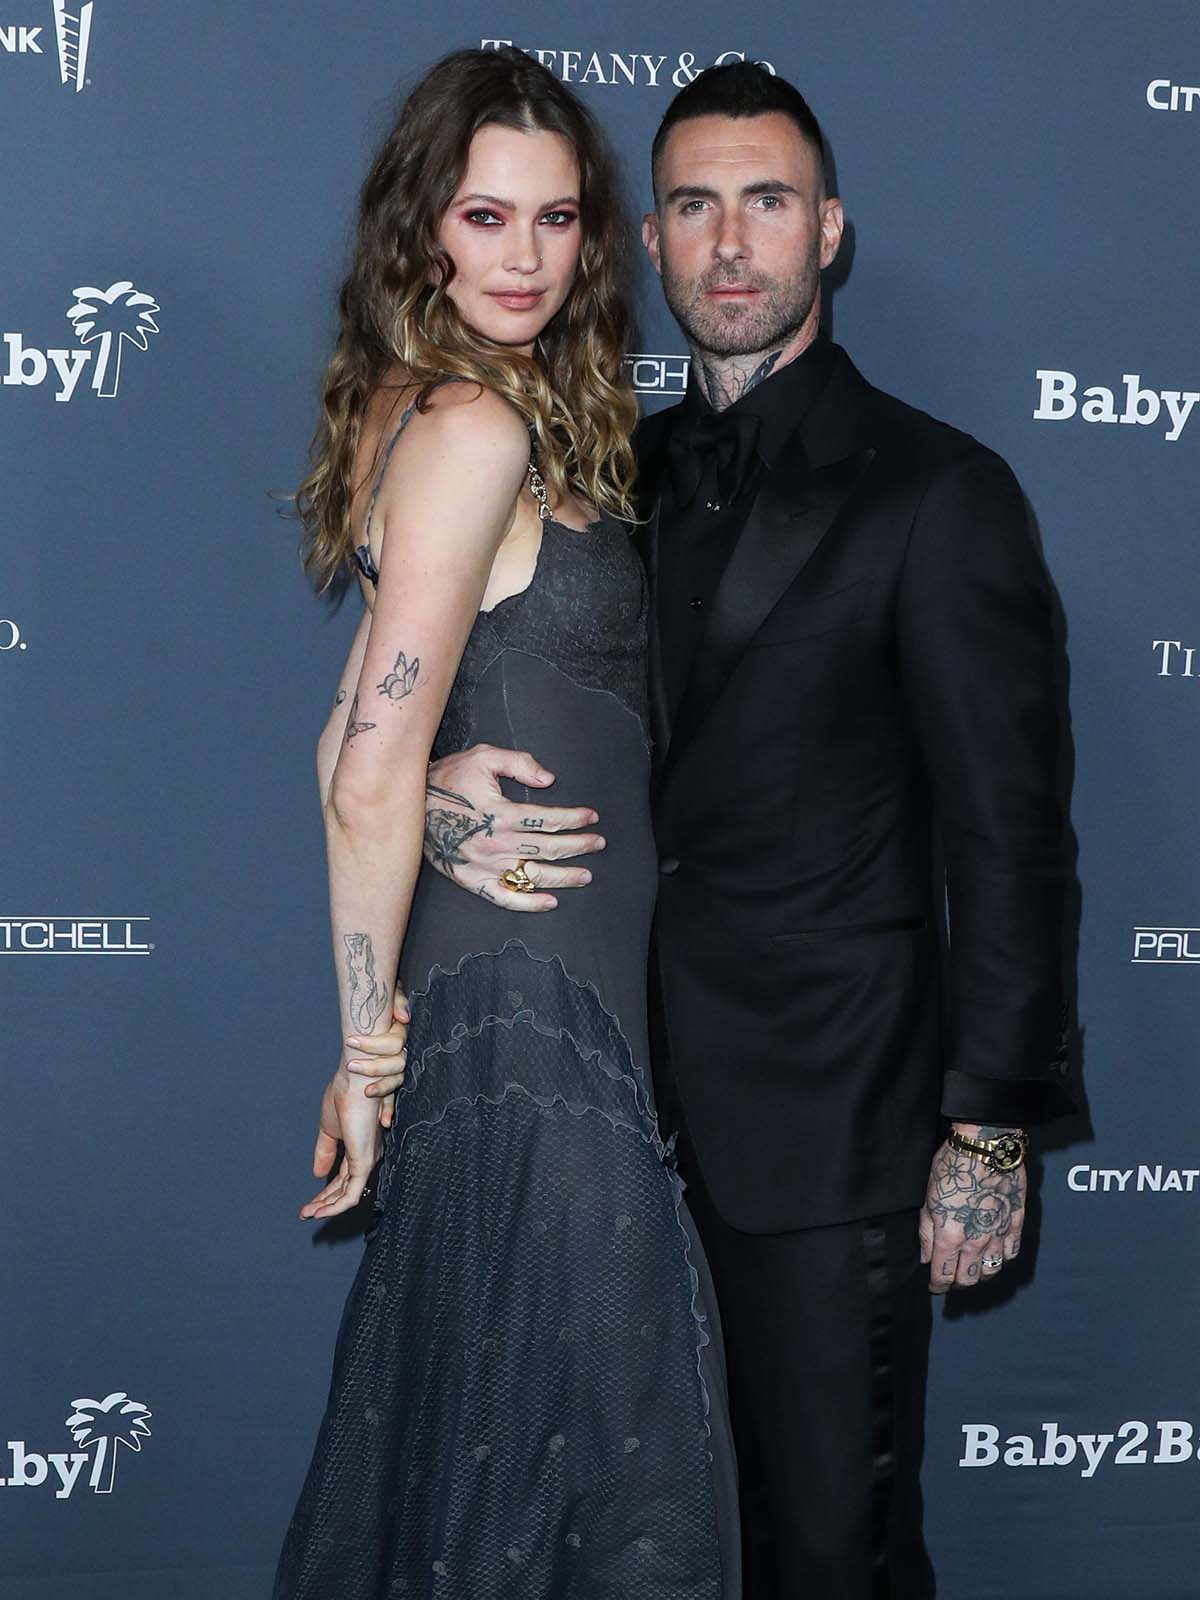 Behati Prinsloo Confirms Pregnancy, Shows Off Baby Bump: Photo | Us Weekly